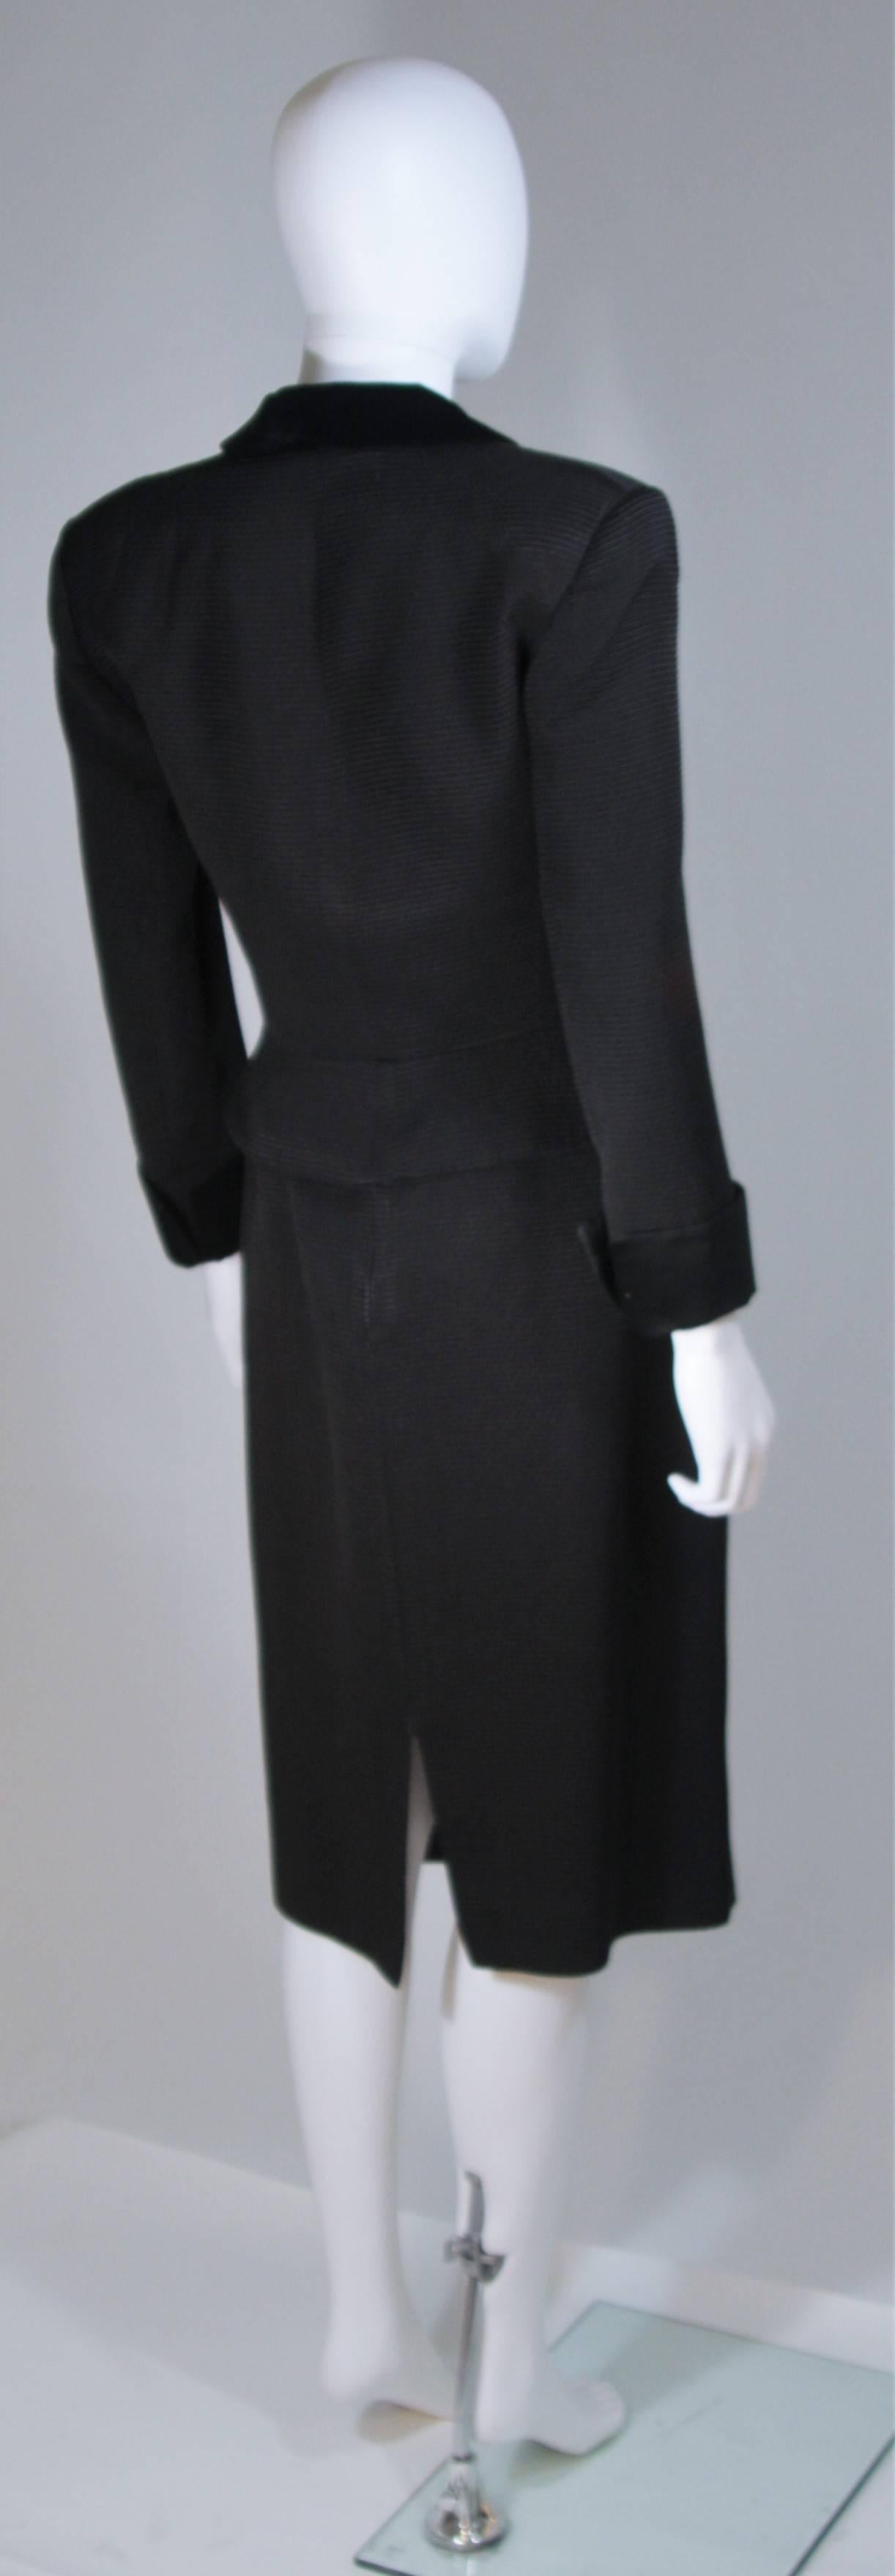 CARVEN BOUTIQUE Black Pintuck Skirt Suit with Velvet and Satin Trim Size 4-6 For Sale 1